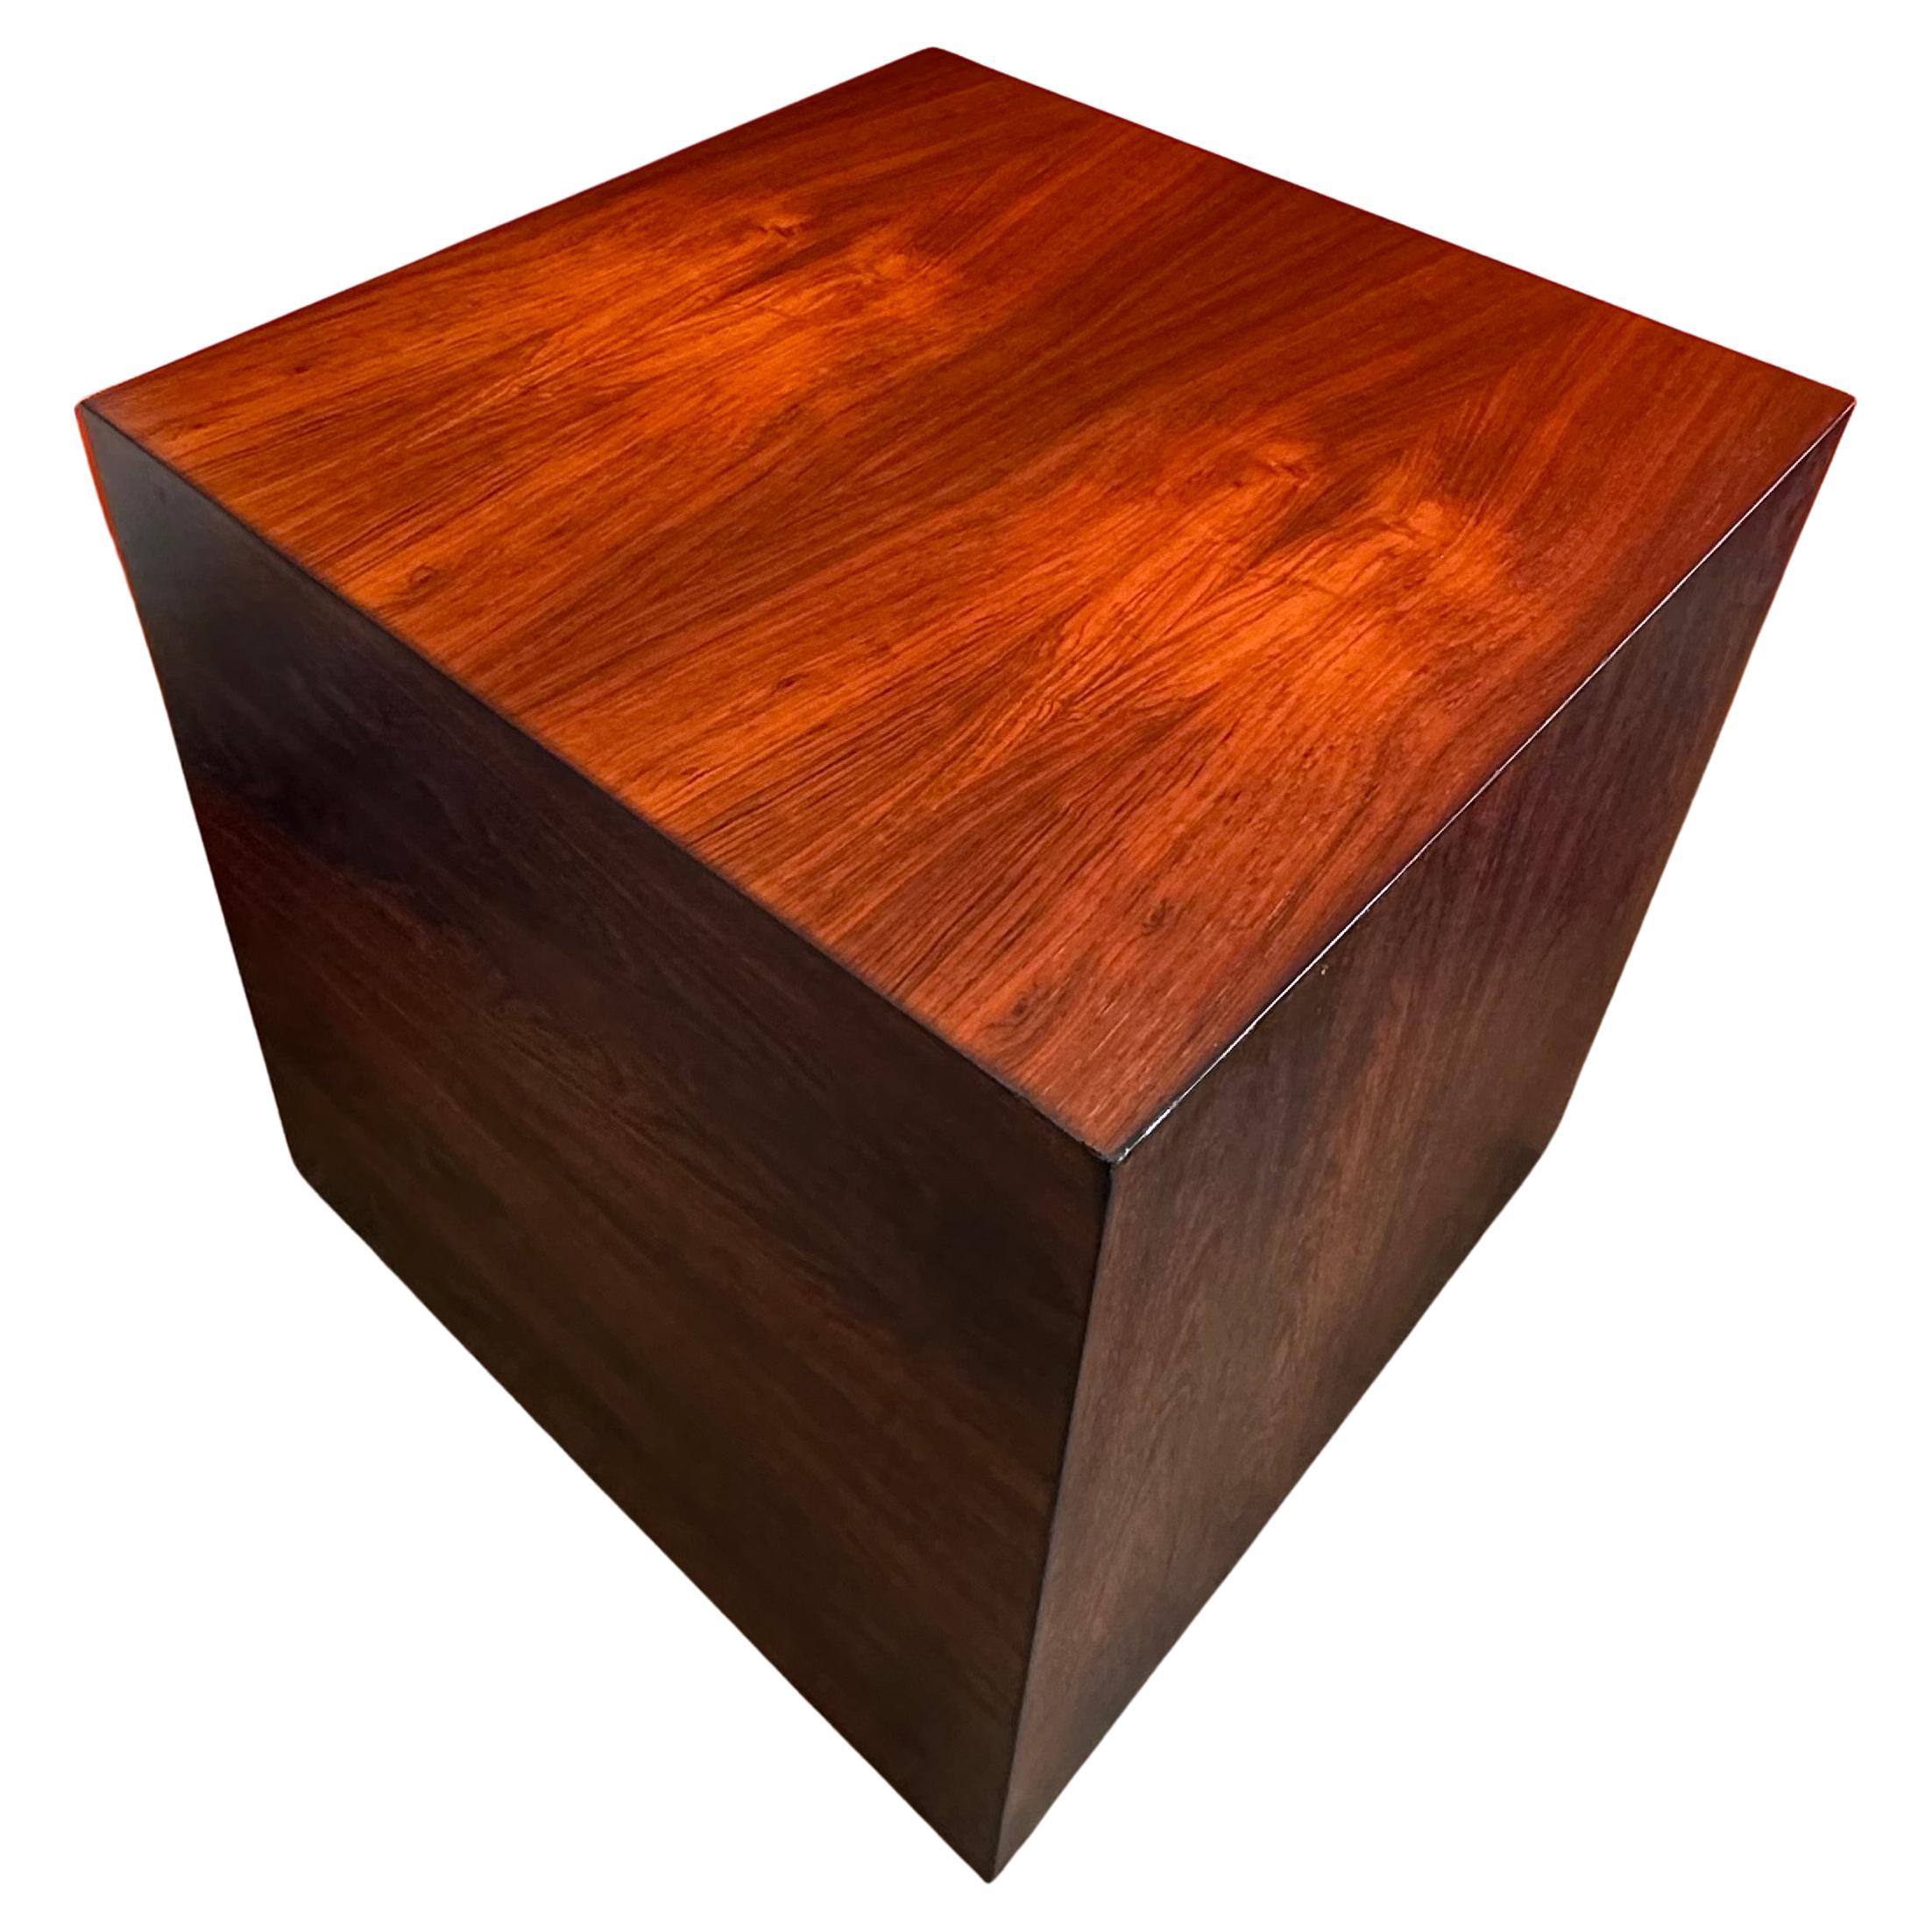 A very cool Danish modern rosewood cube side table / coffee table base, circa 1970s. The cube is in very good vintage condition and covered in a rosewood laminate. It can be used as a coffee table with a square or round glass top or as a side table.